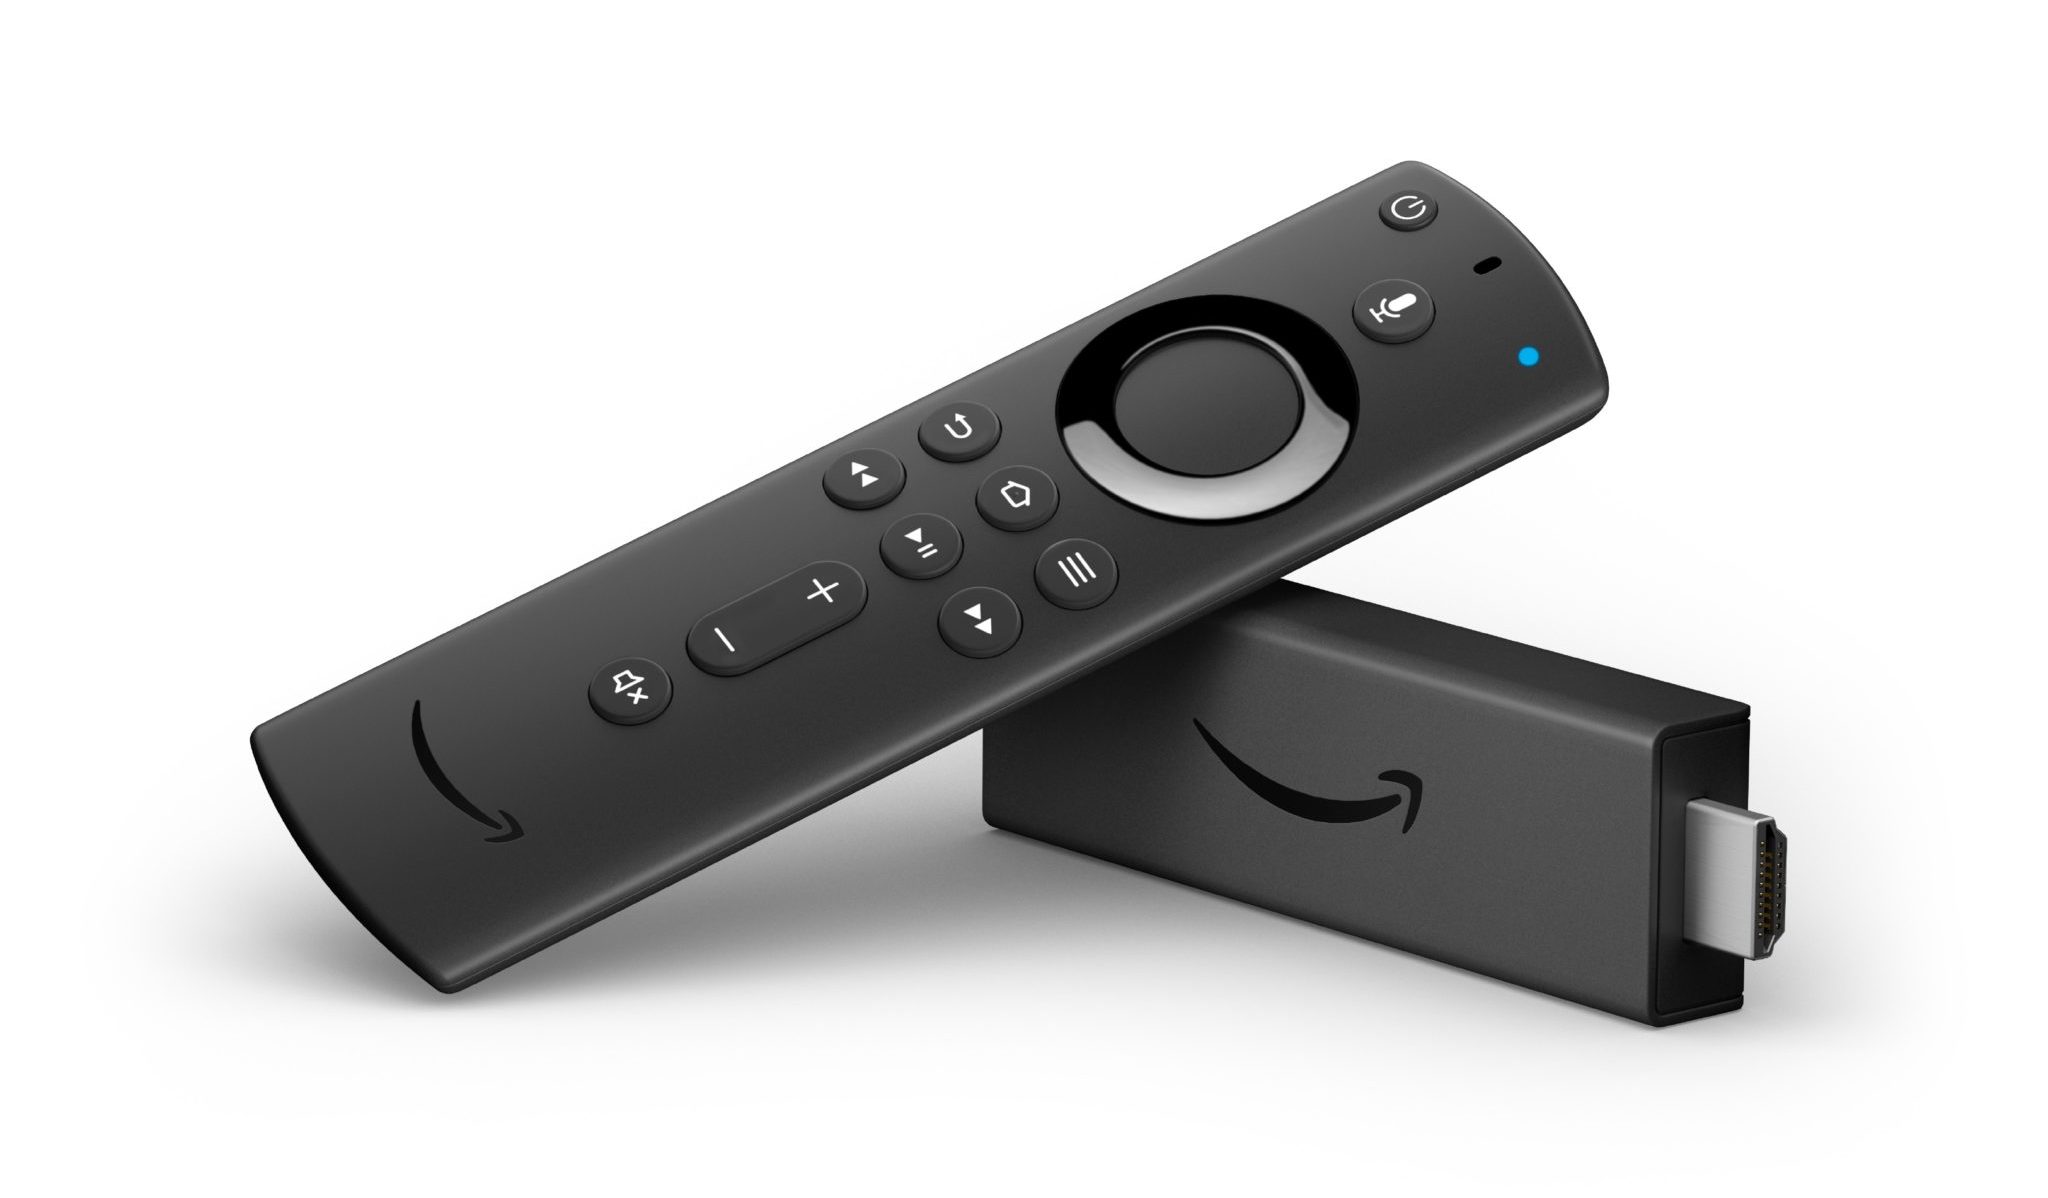 Amazon Adds Spanish Language Support to The Fire TV & Fire TV Stick